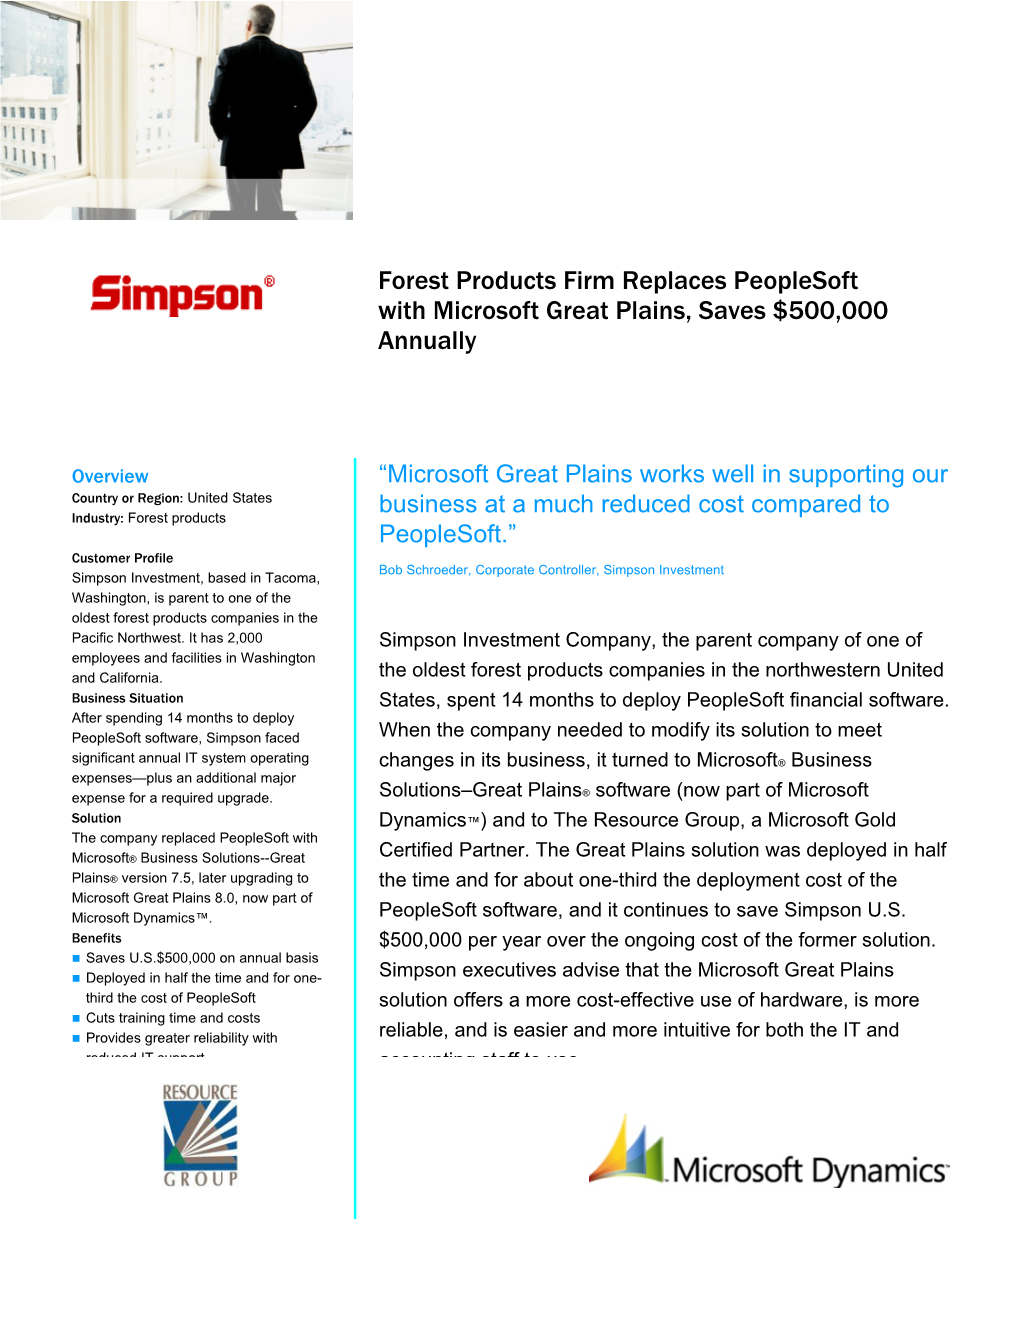 Forest Products Firm Replaces Peoplesoft with Microsoft Great Plains, Saves $500,000 Annually